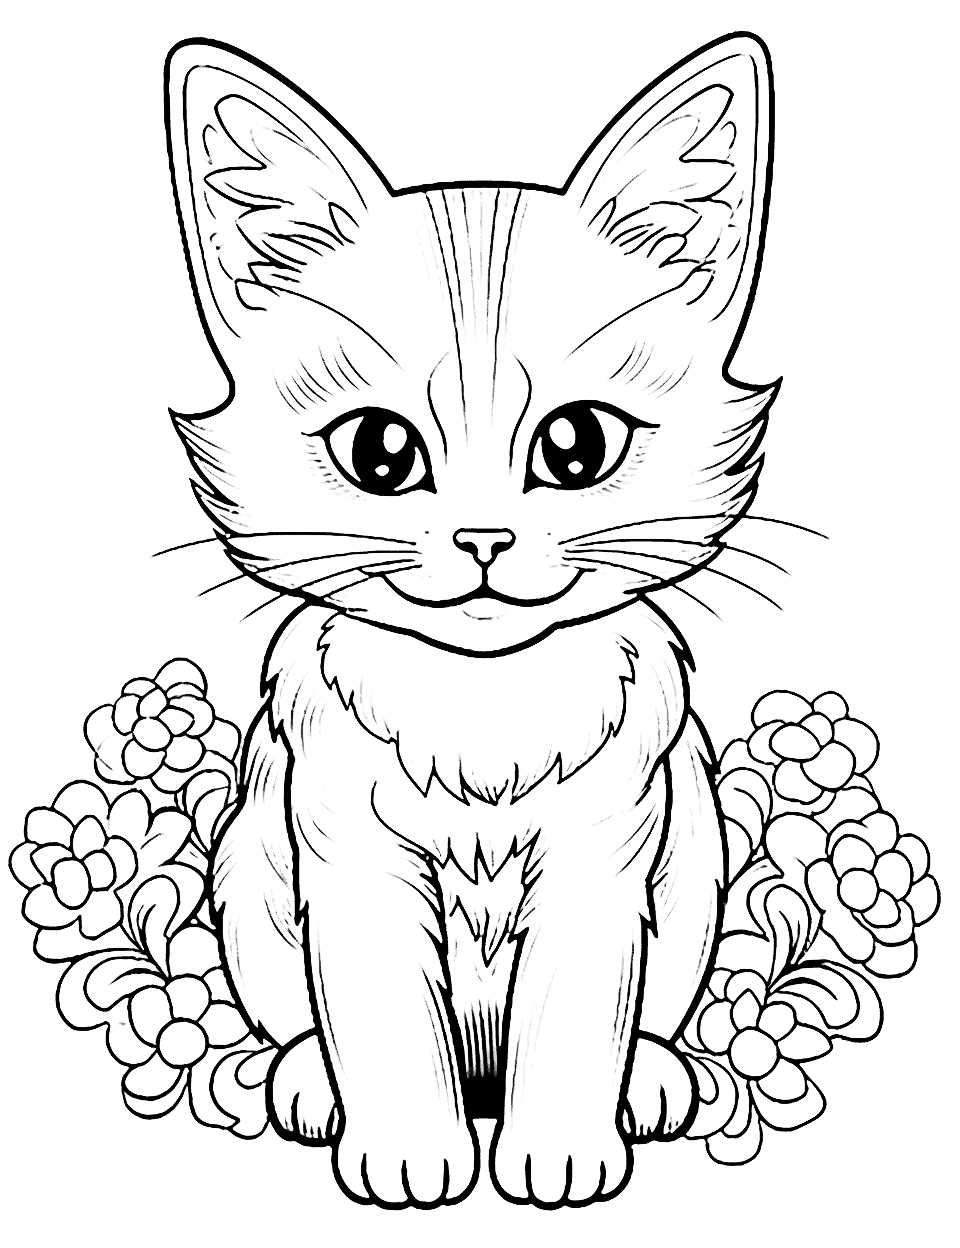 Mandala Kitten Amongst Flowers Cat Coloring Page - A kitten outline filled with intricate mandala designs, surrounded by various flowers.